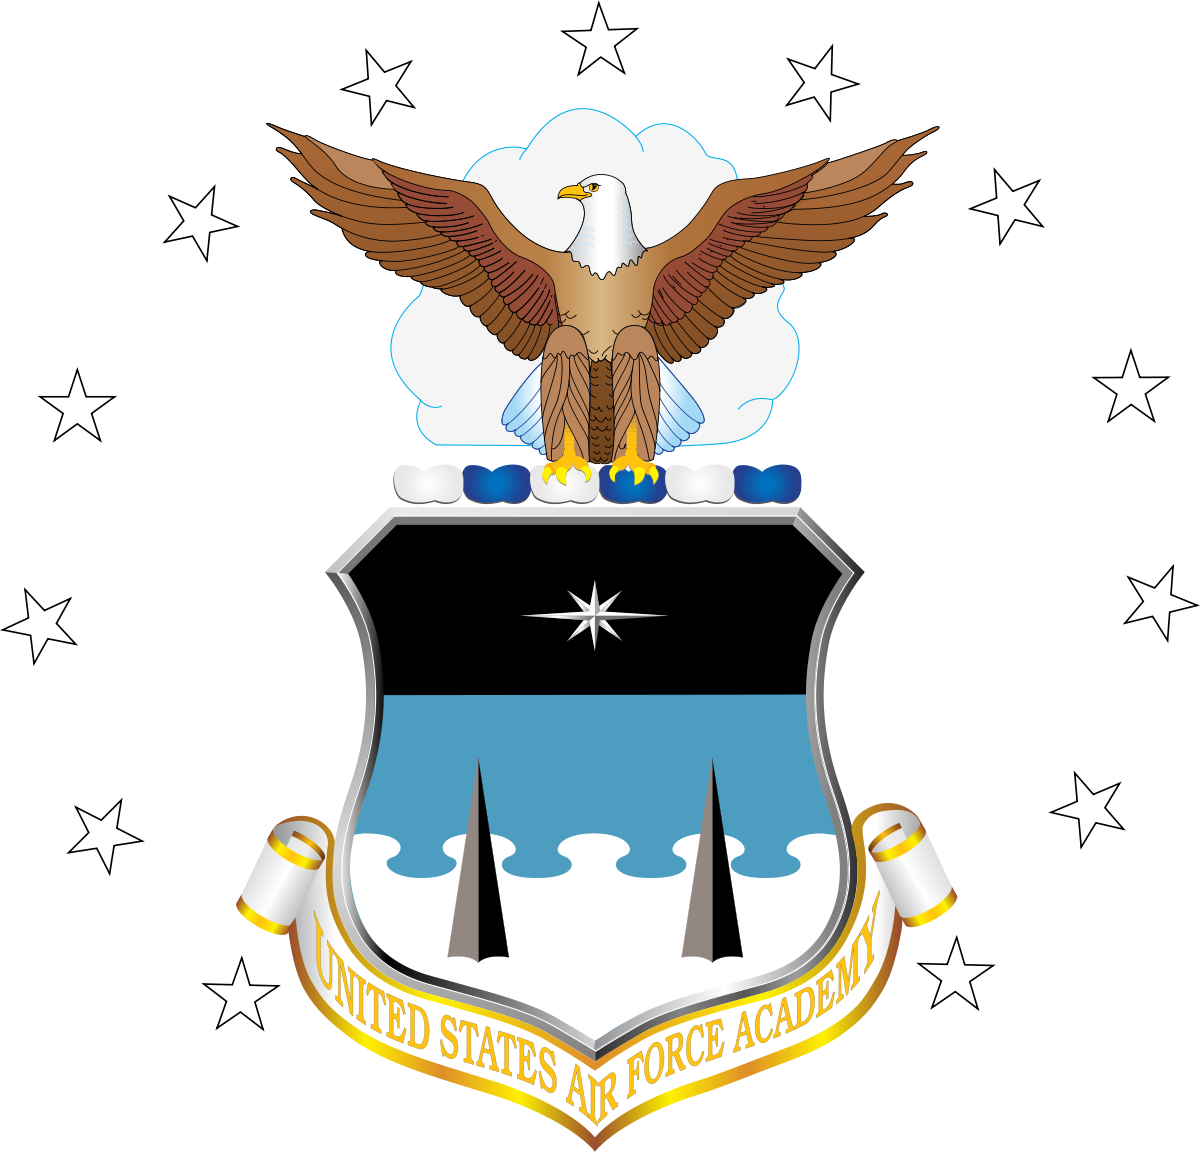 United States Air Force Academy Wikipedia